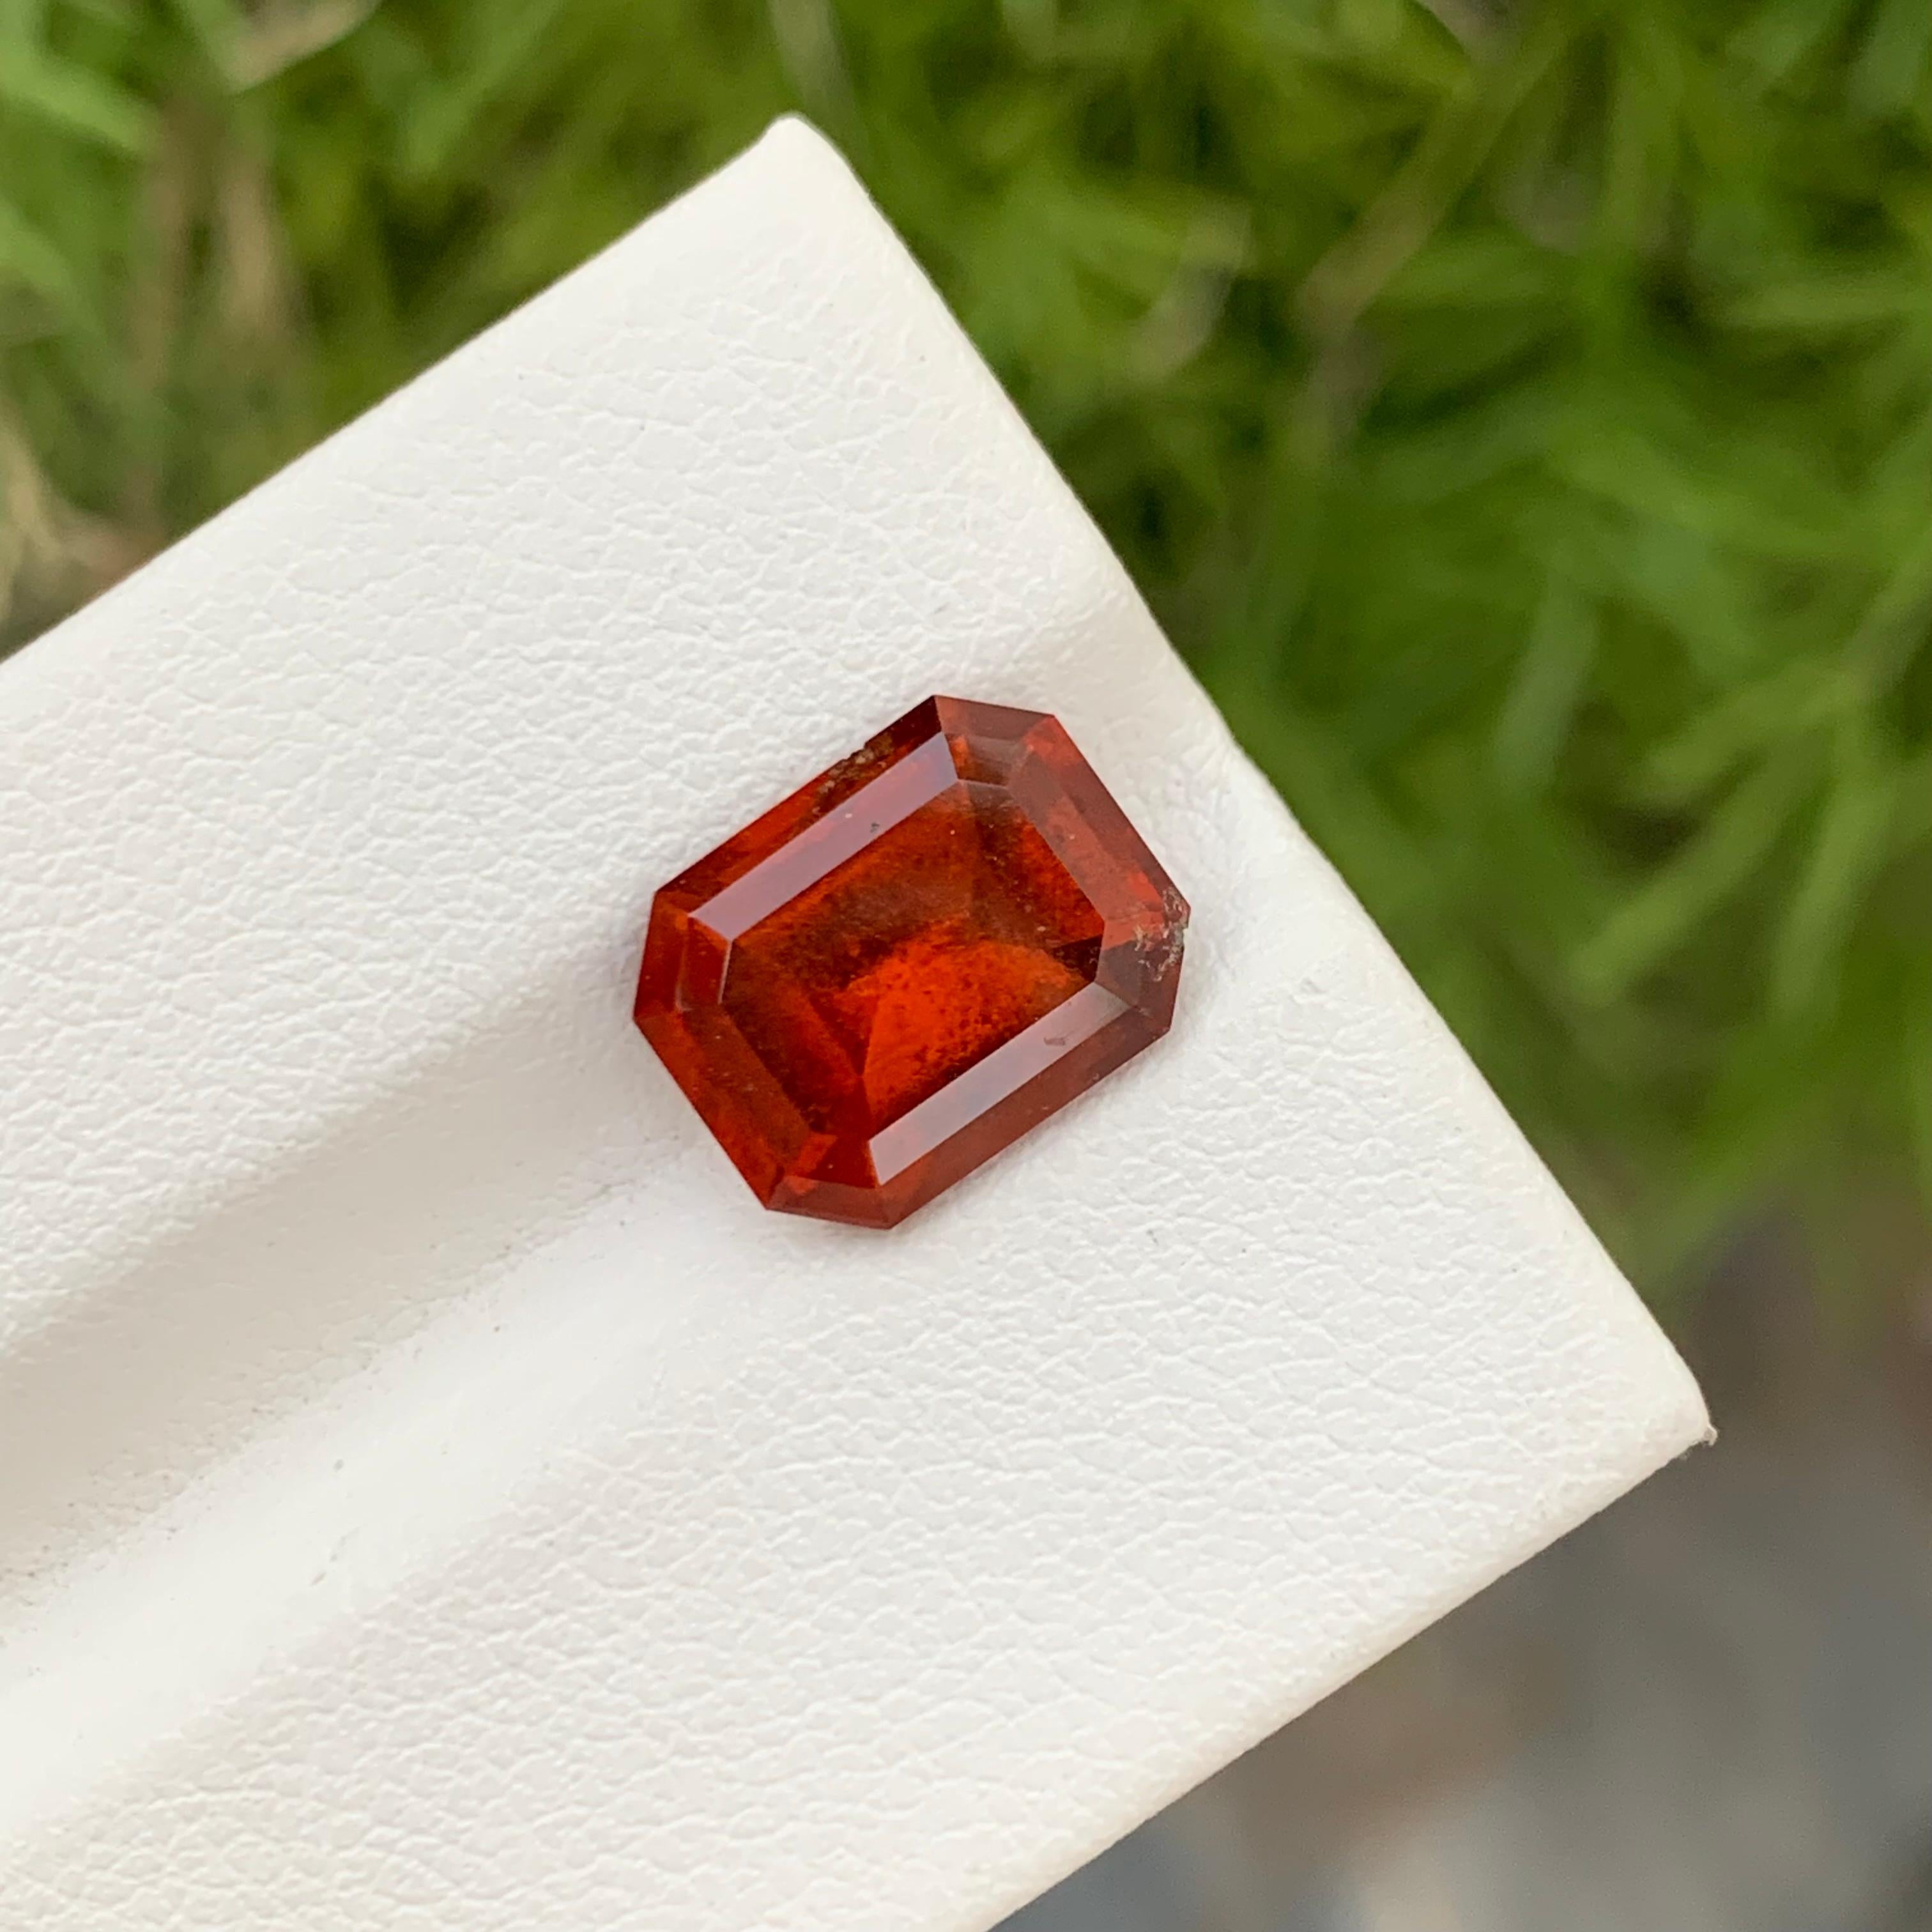 Emerald Cut 4.95 Carats Pretty Natural Loose Smoky Hessonite Garnet Gem For Ring  For Sale